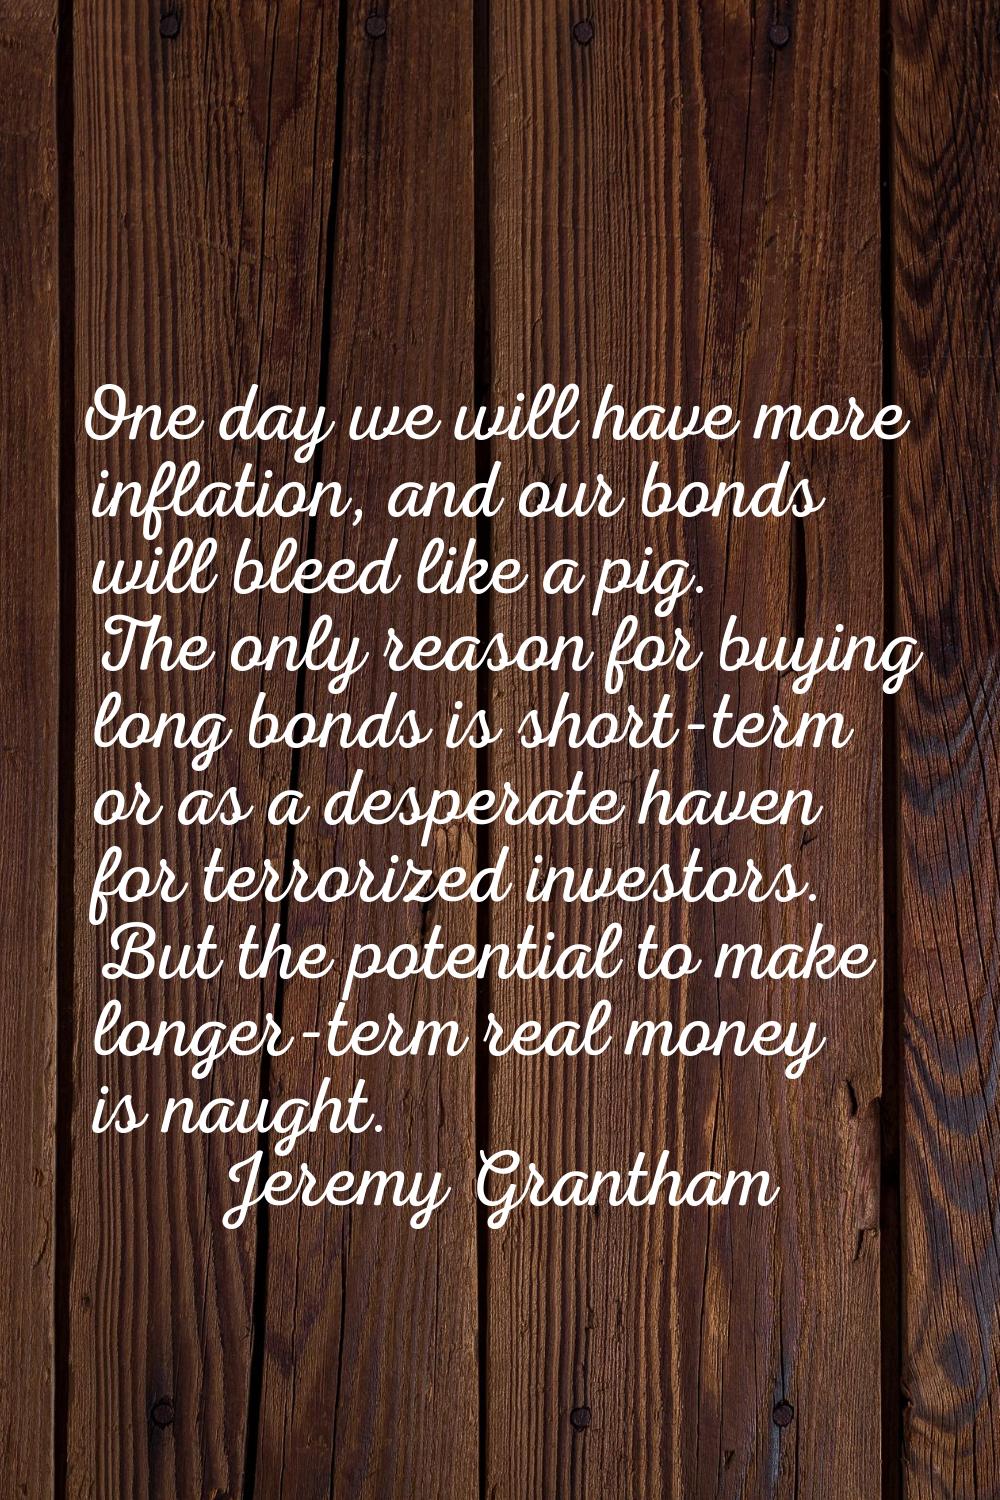 One day we will have more inflation, and our bonds will bleed like a pig. The only reason for buyin